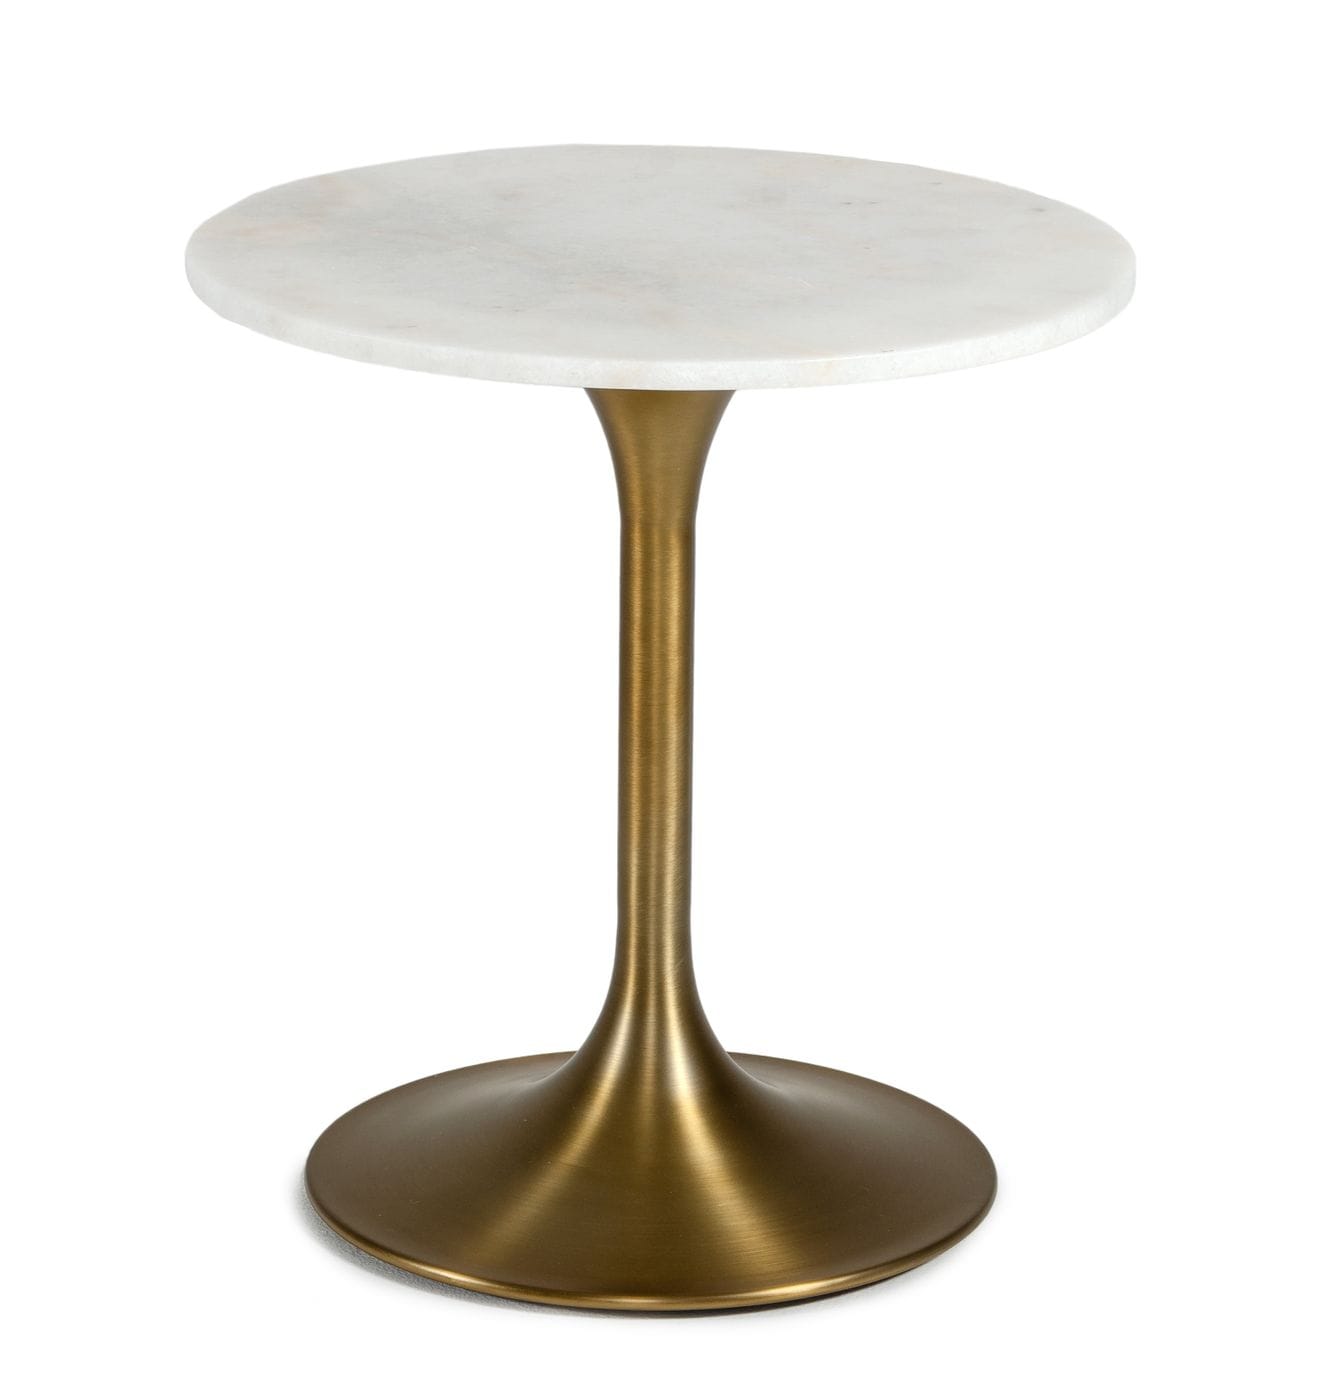 Modrest Collins - Glam White Marble & Gold End Table-2